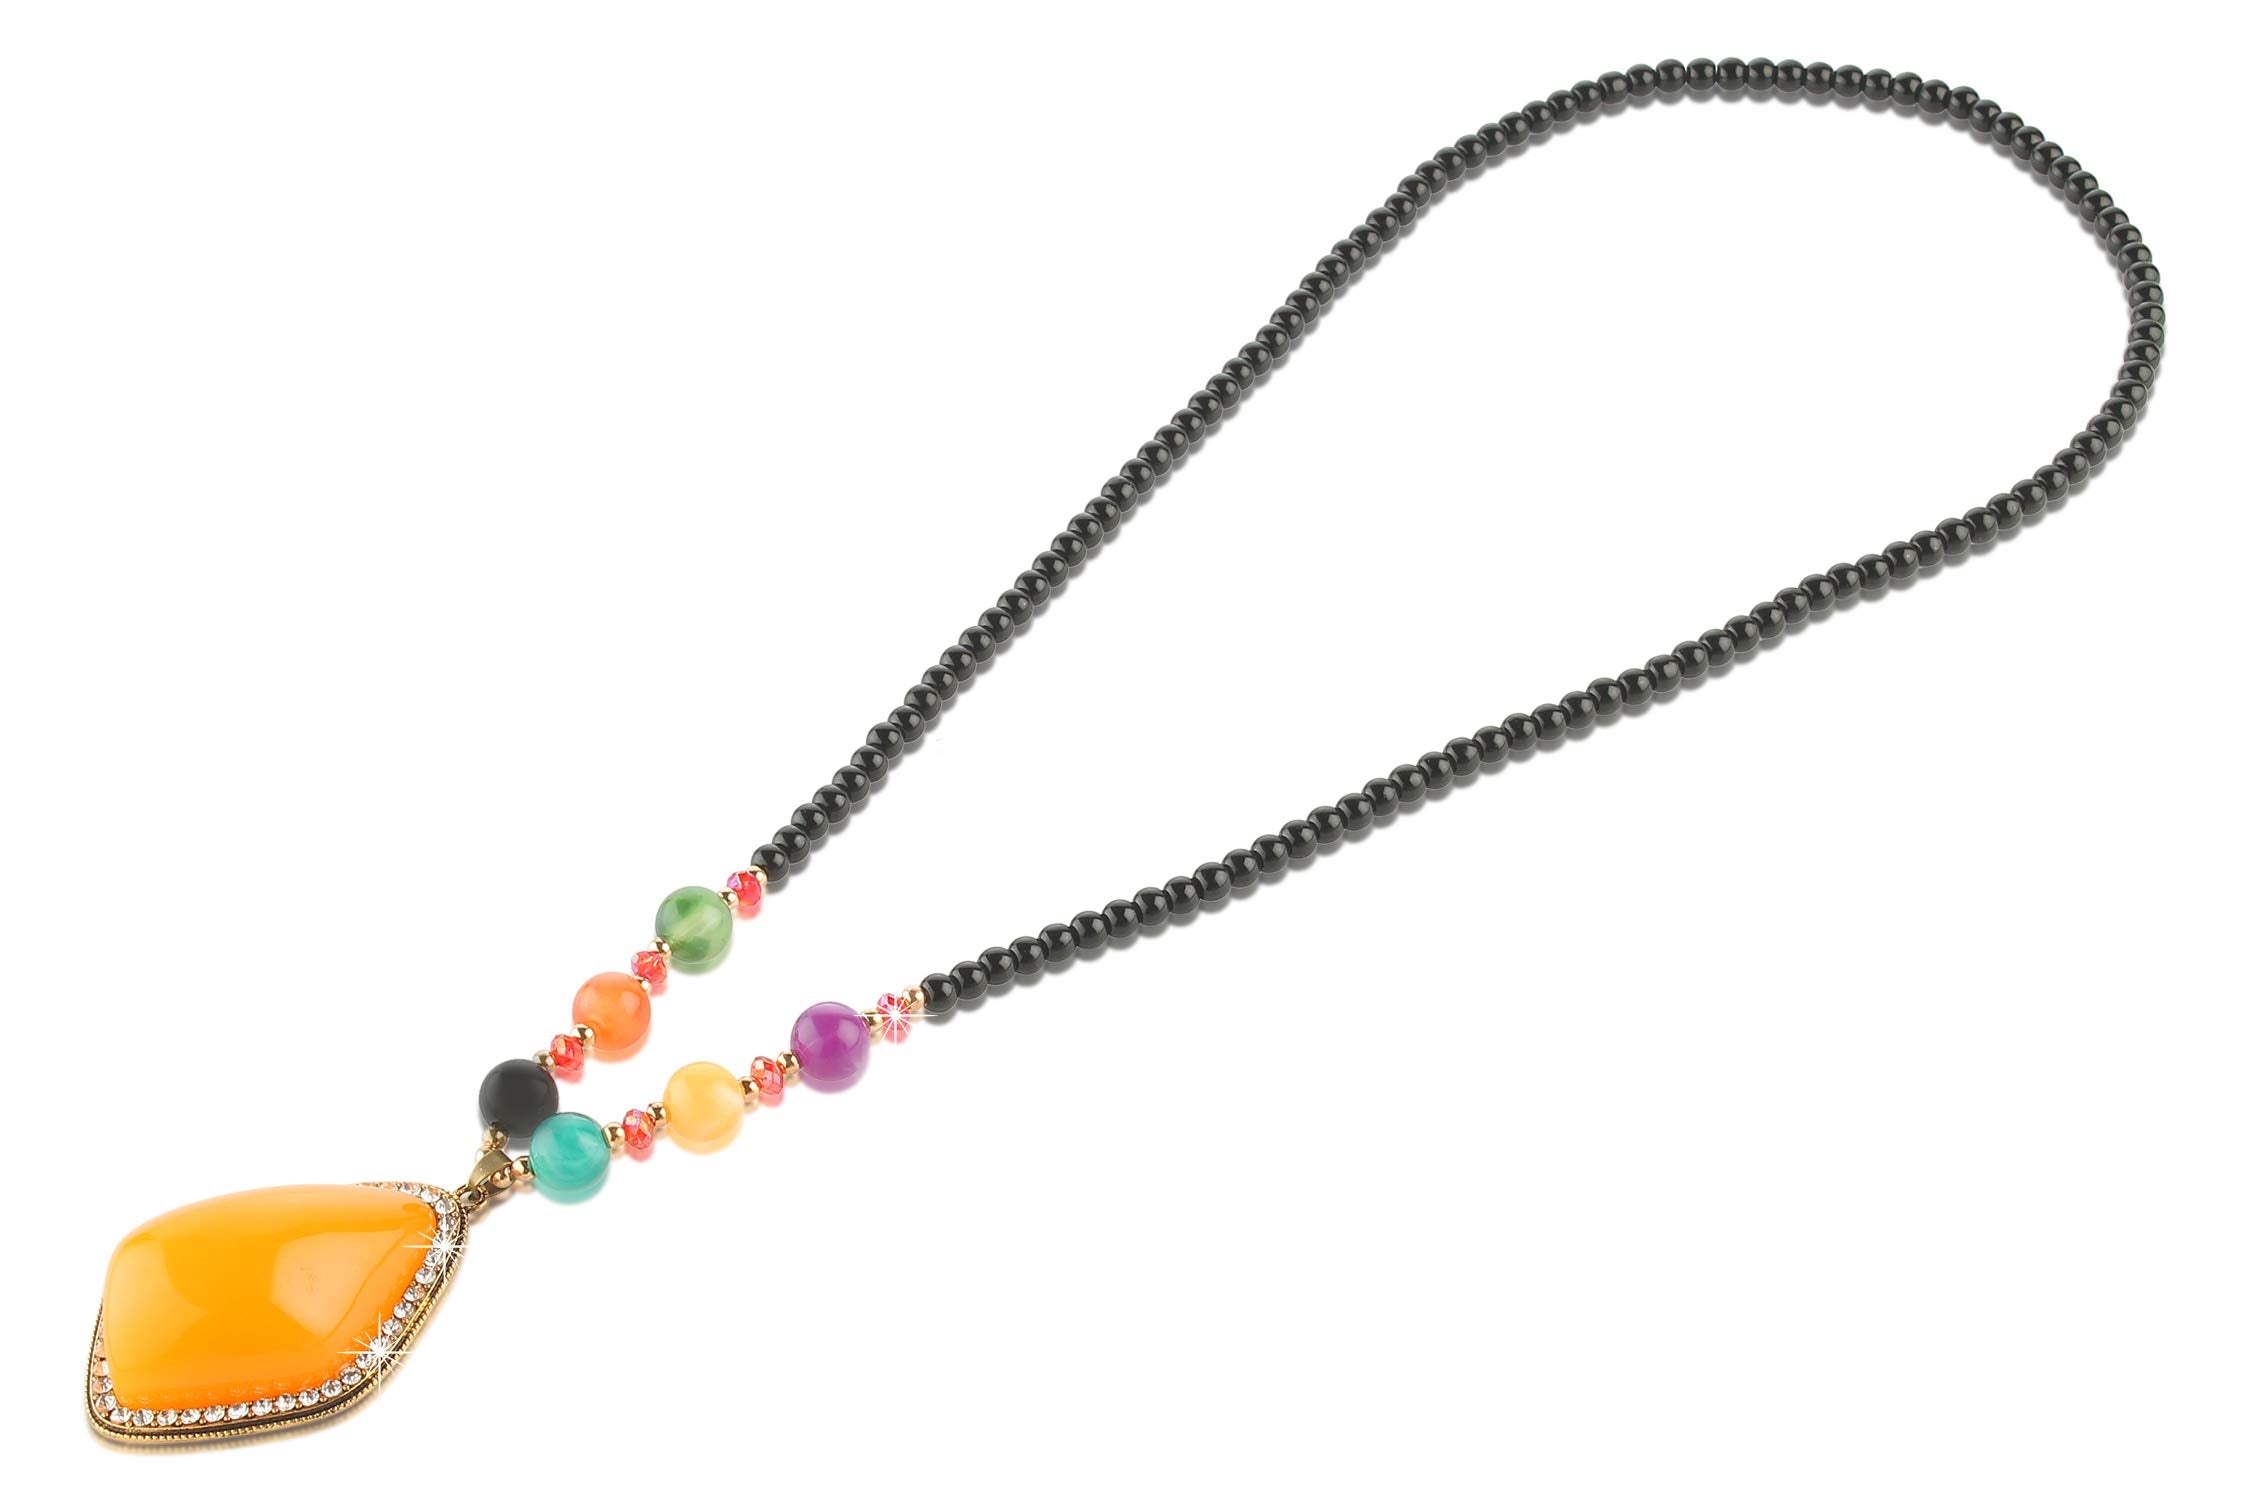 Yellow Chimes Tibetan Pendant Necklace with Tribal Beads Necklace Jewellery Set for Women and Girls